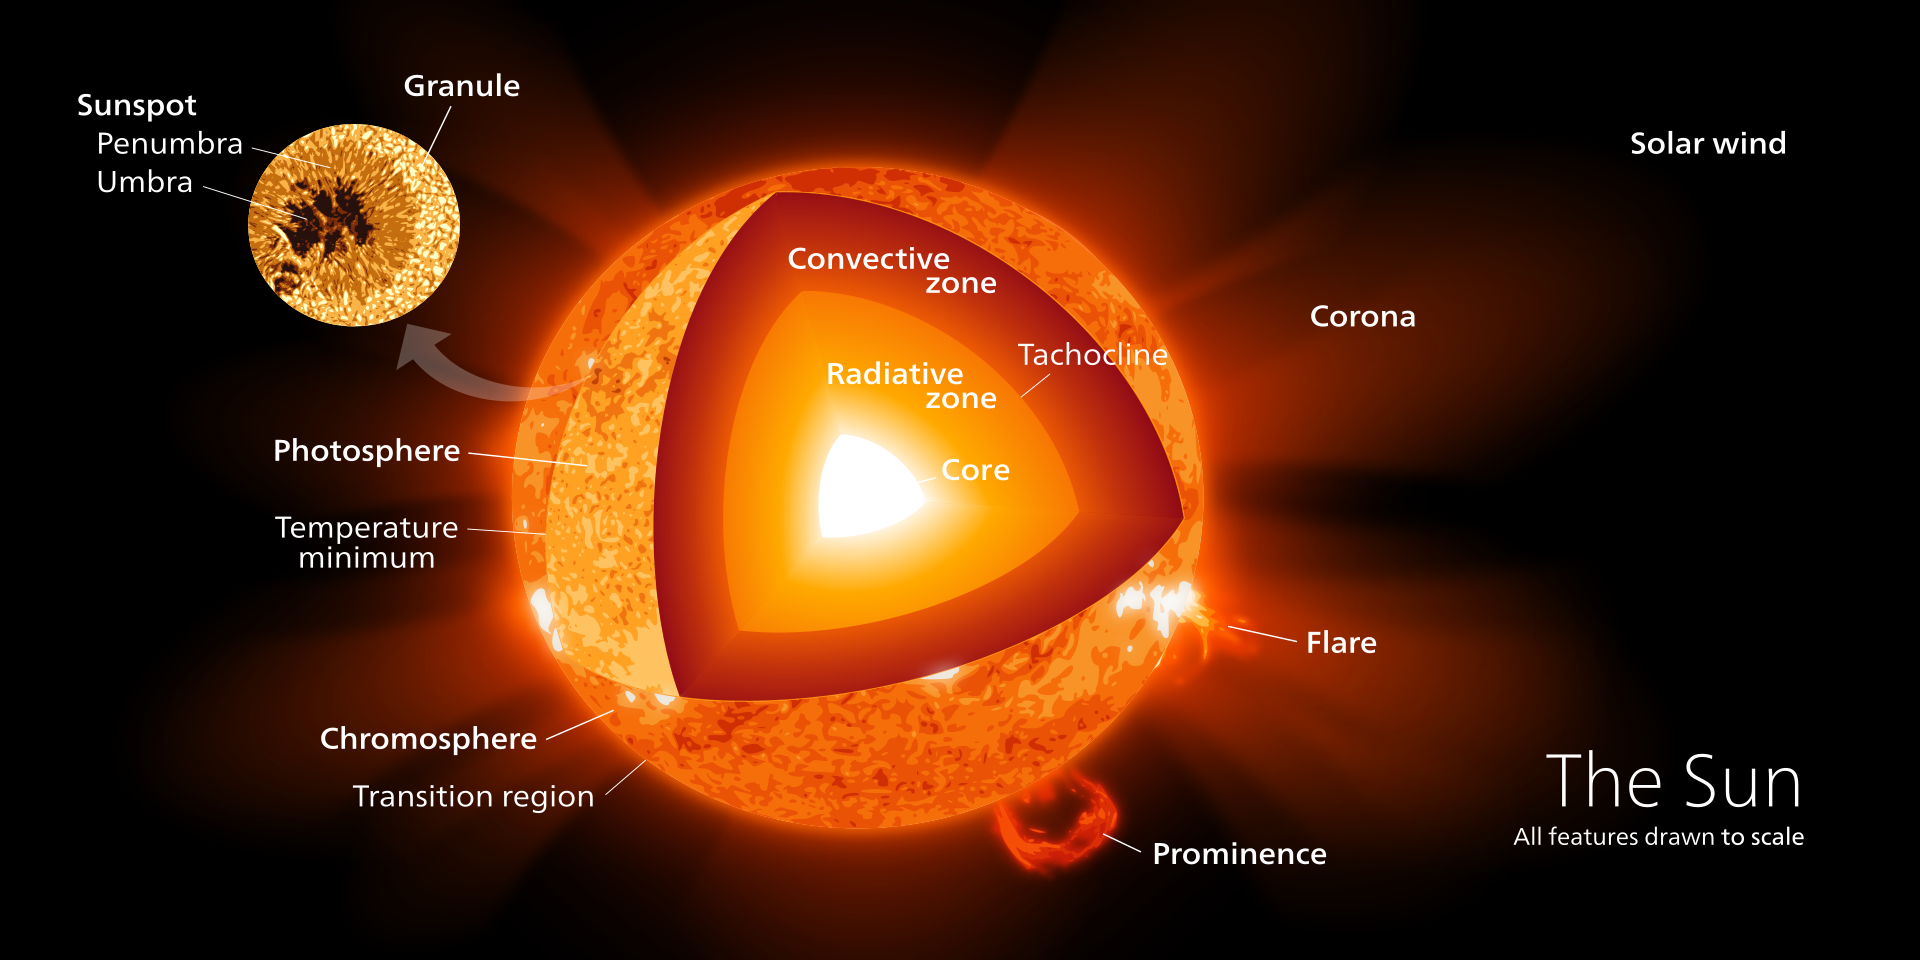 The Remaining Lifespan of the Sun: A Cosmic Perspective